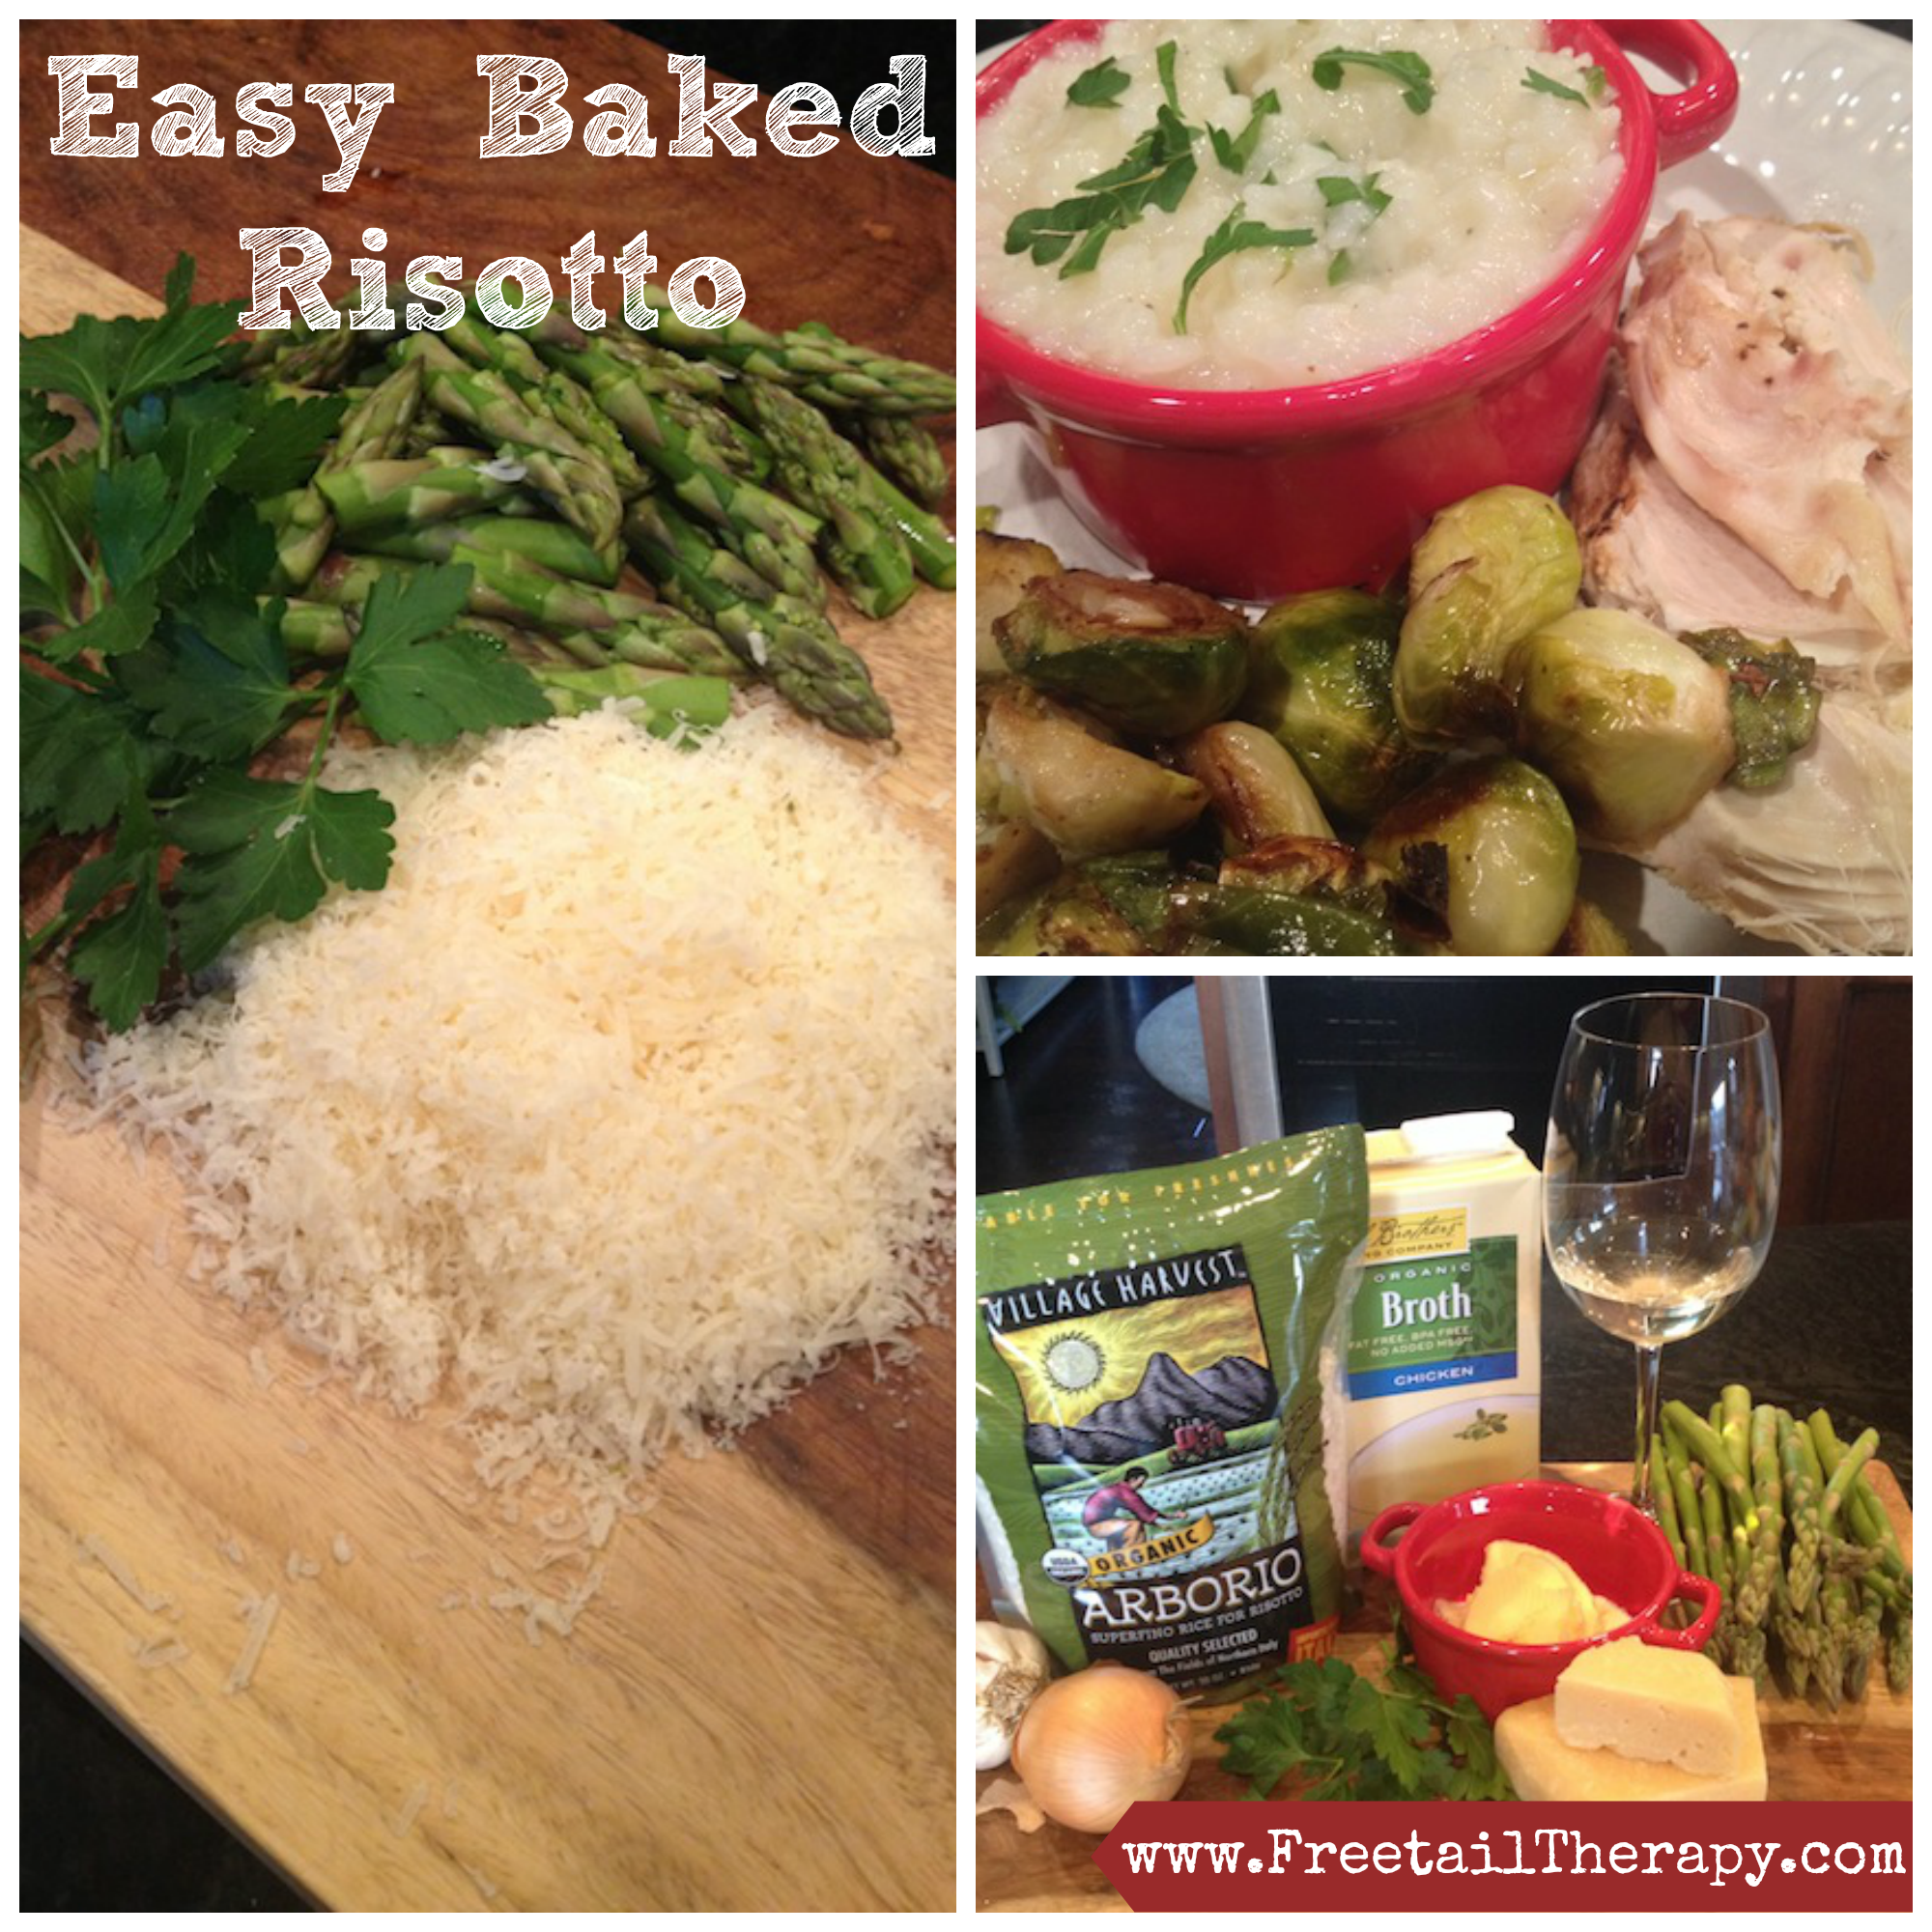 Easy Baked Risotto Recipe